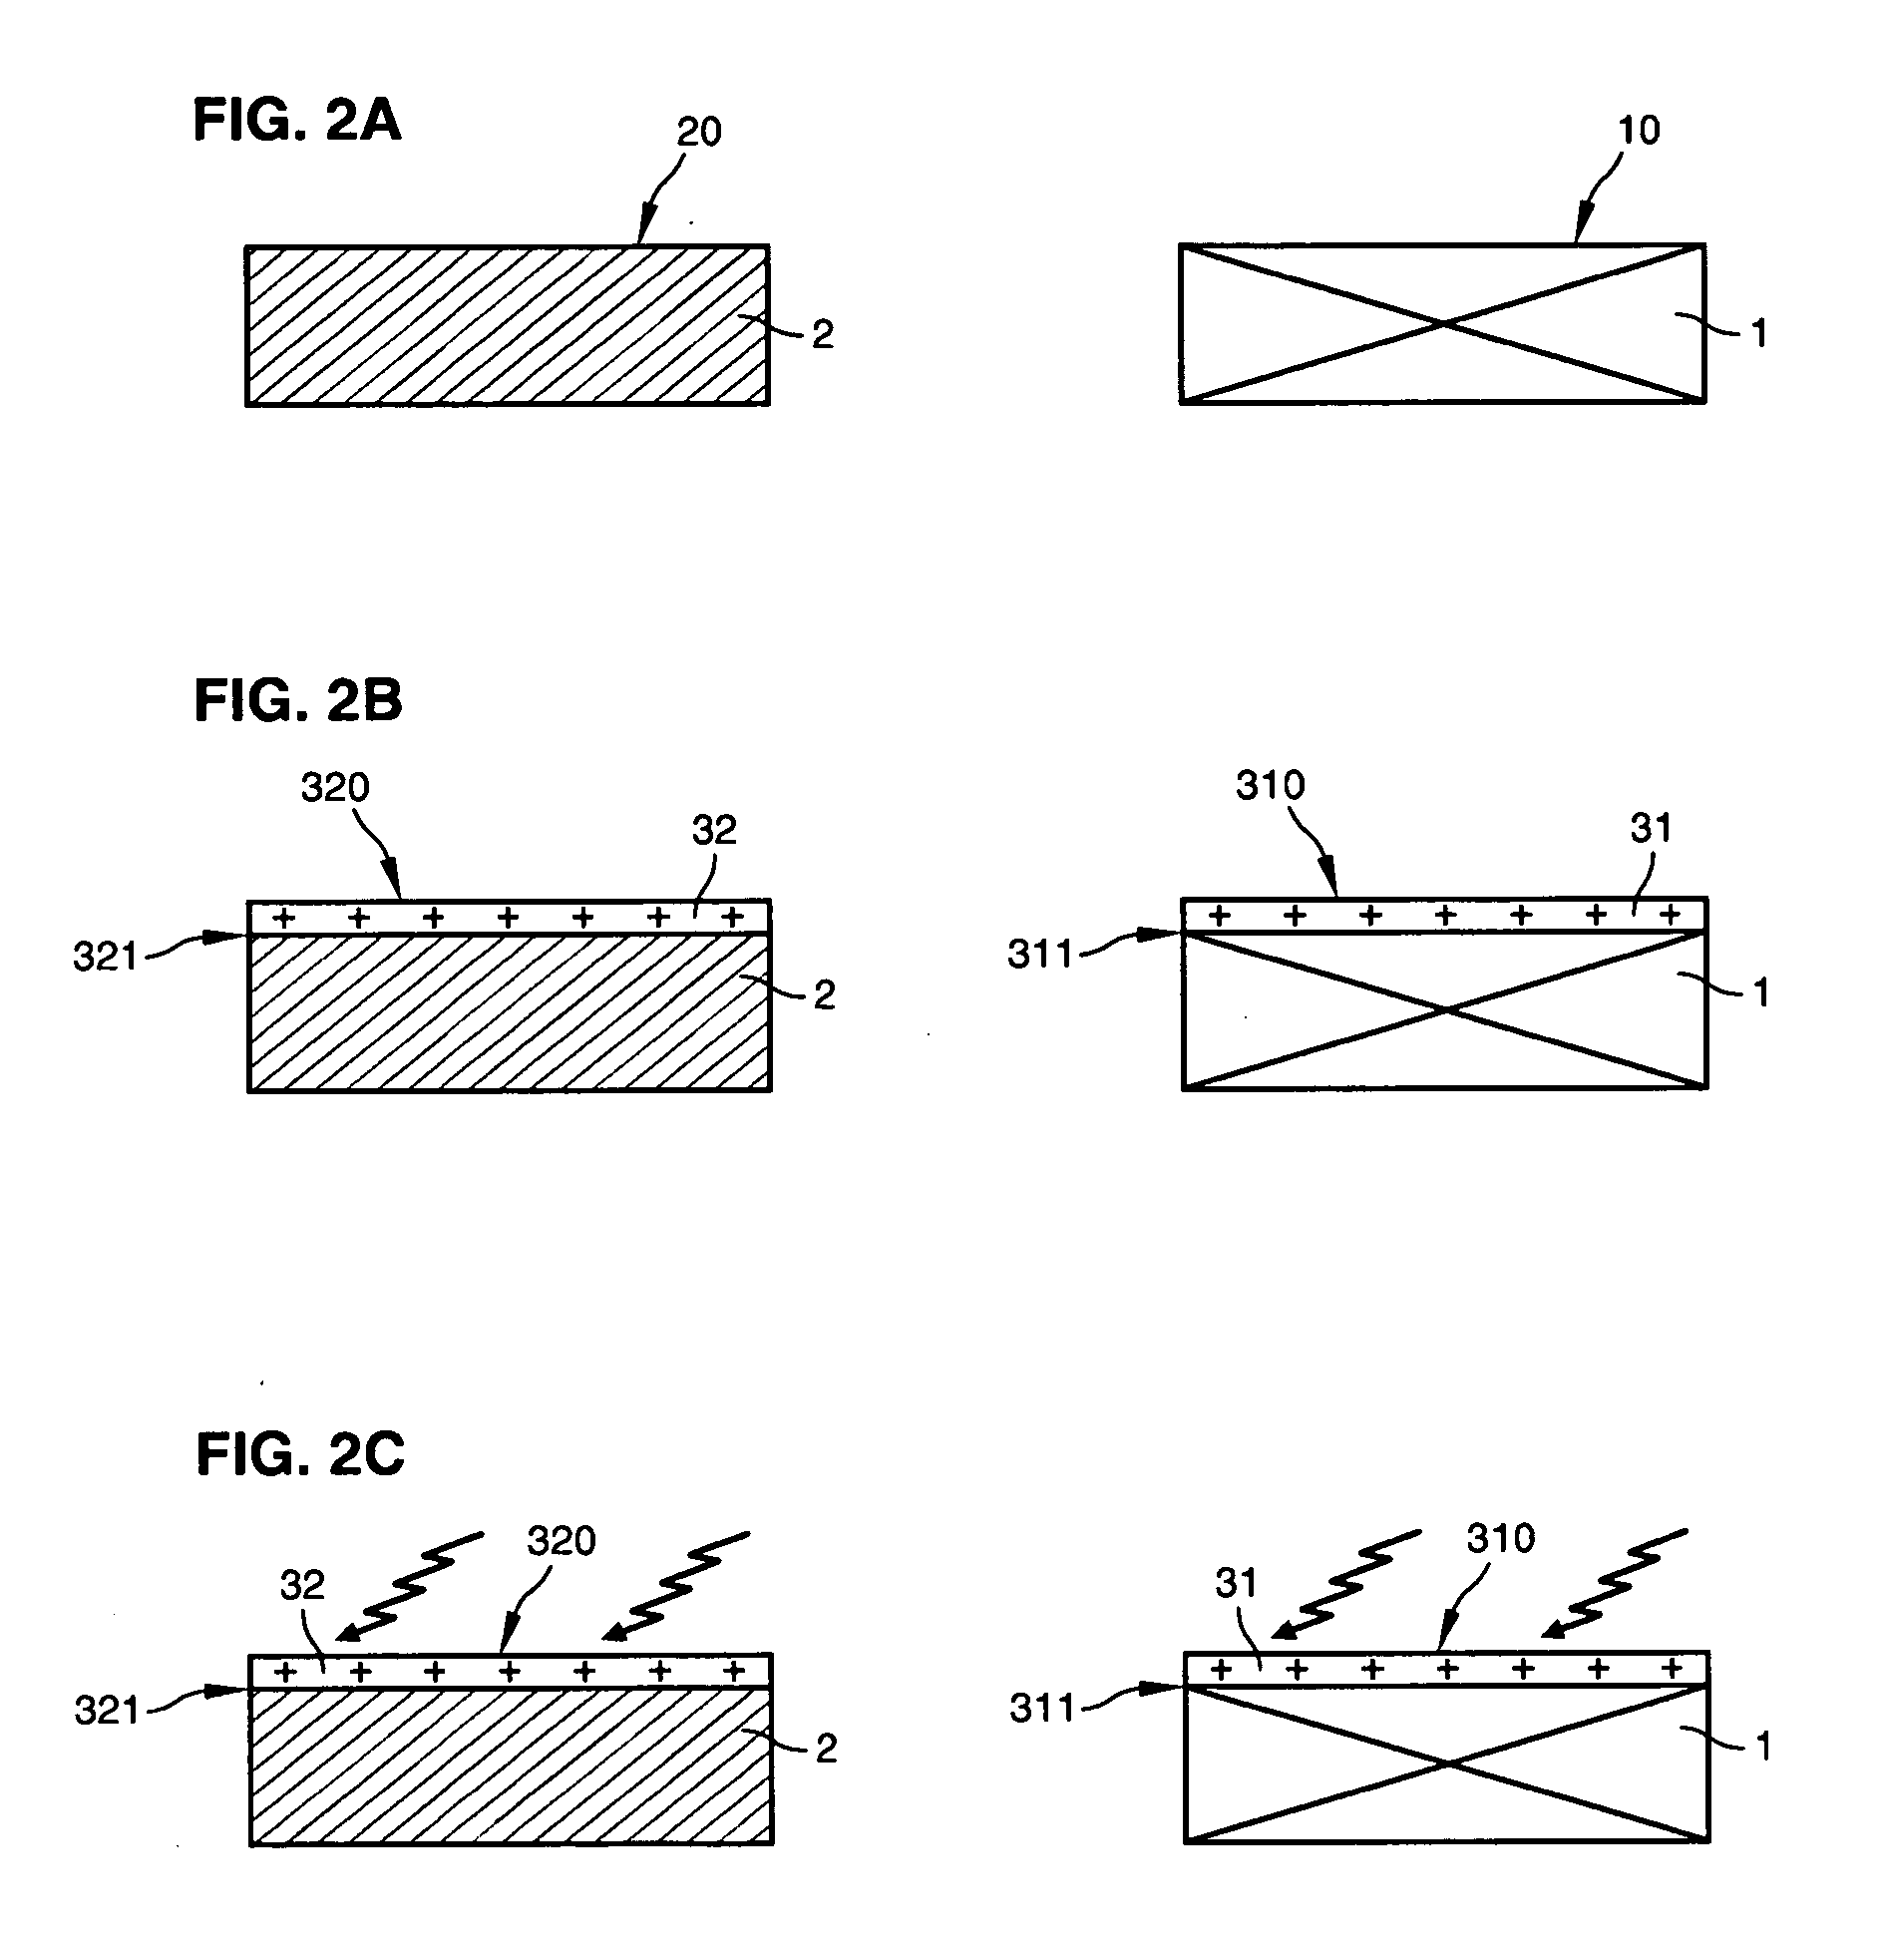 Method of fabricating a composite substrate with improved electrical properties